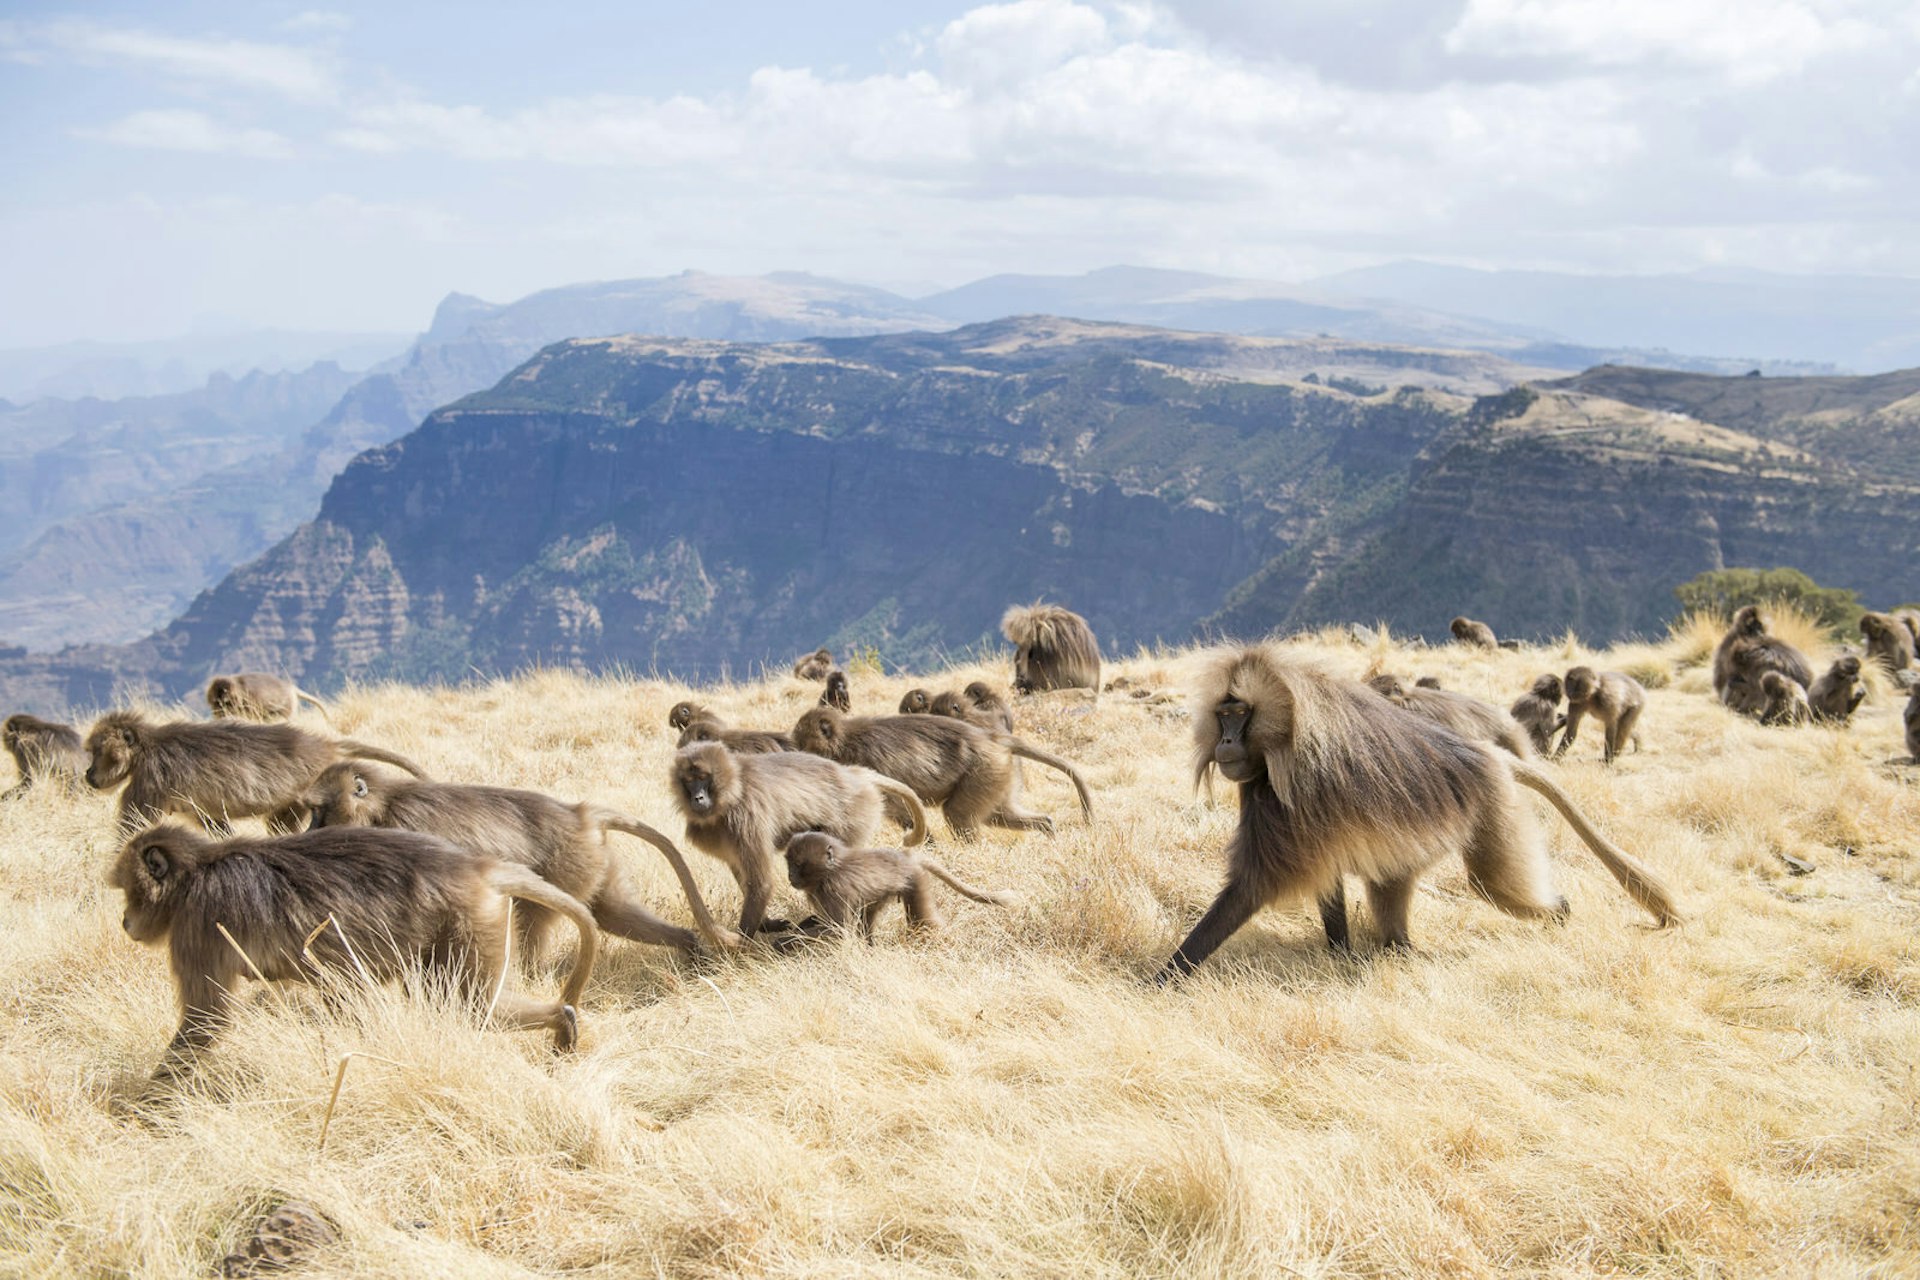 A troop of gelada monkeys, including several babies, walk along a high plateau in Ethiopia's Simien Mountain range. They're golden-brown in colour, with long hair.